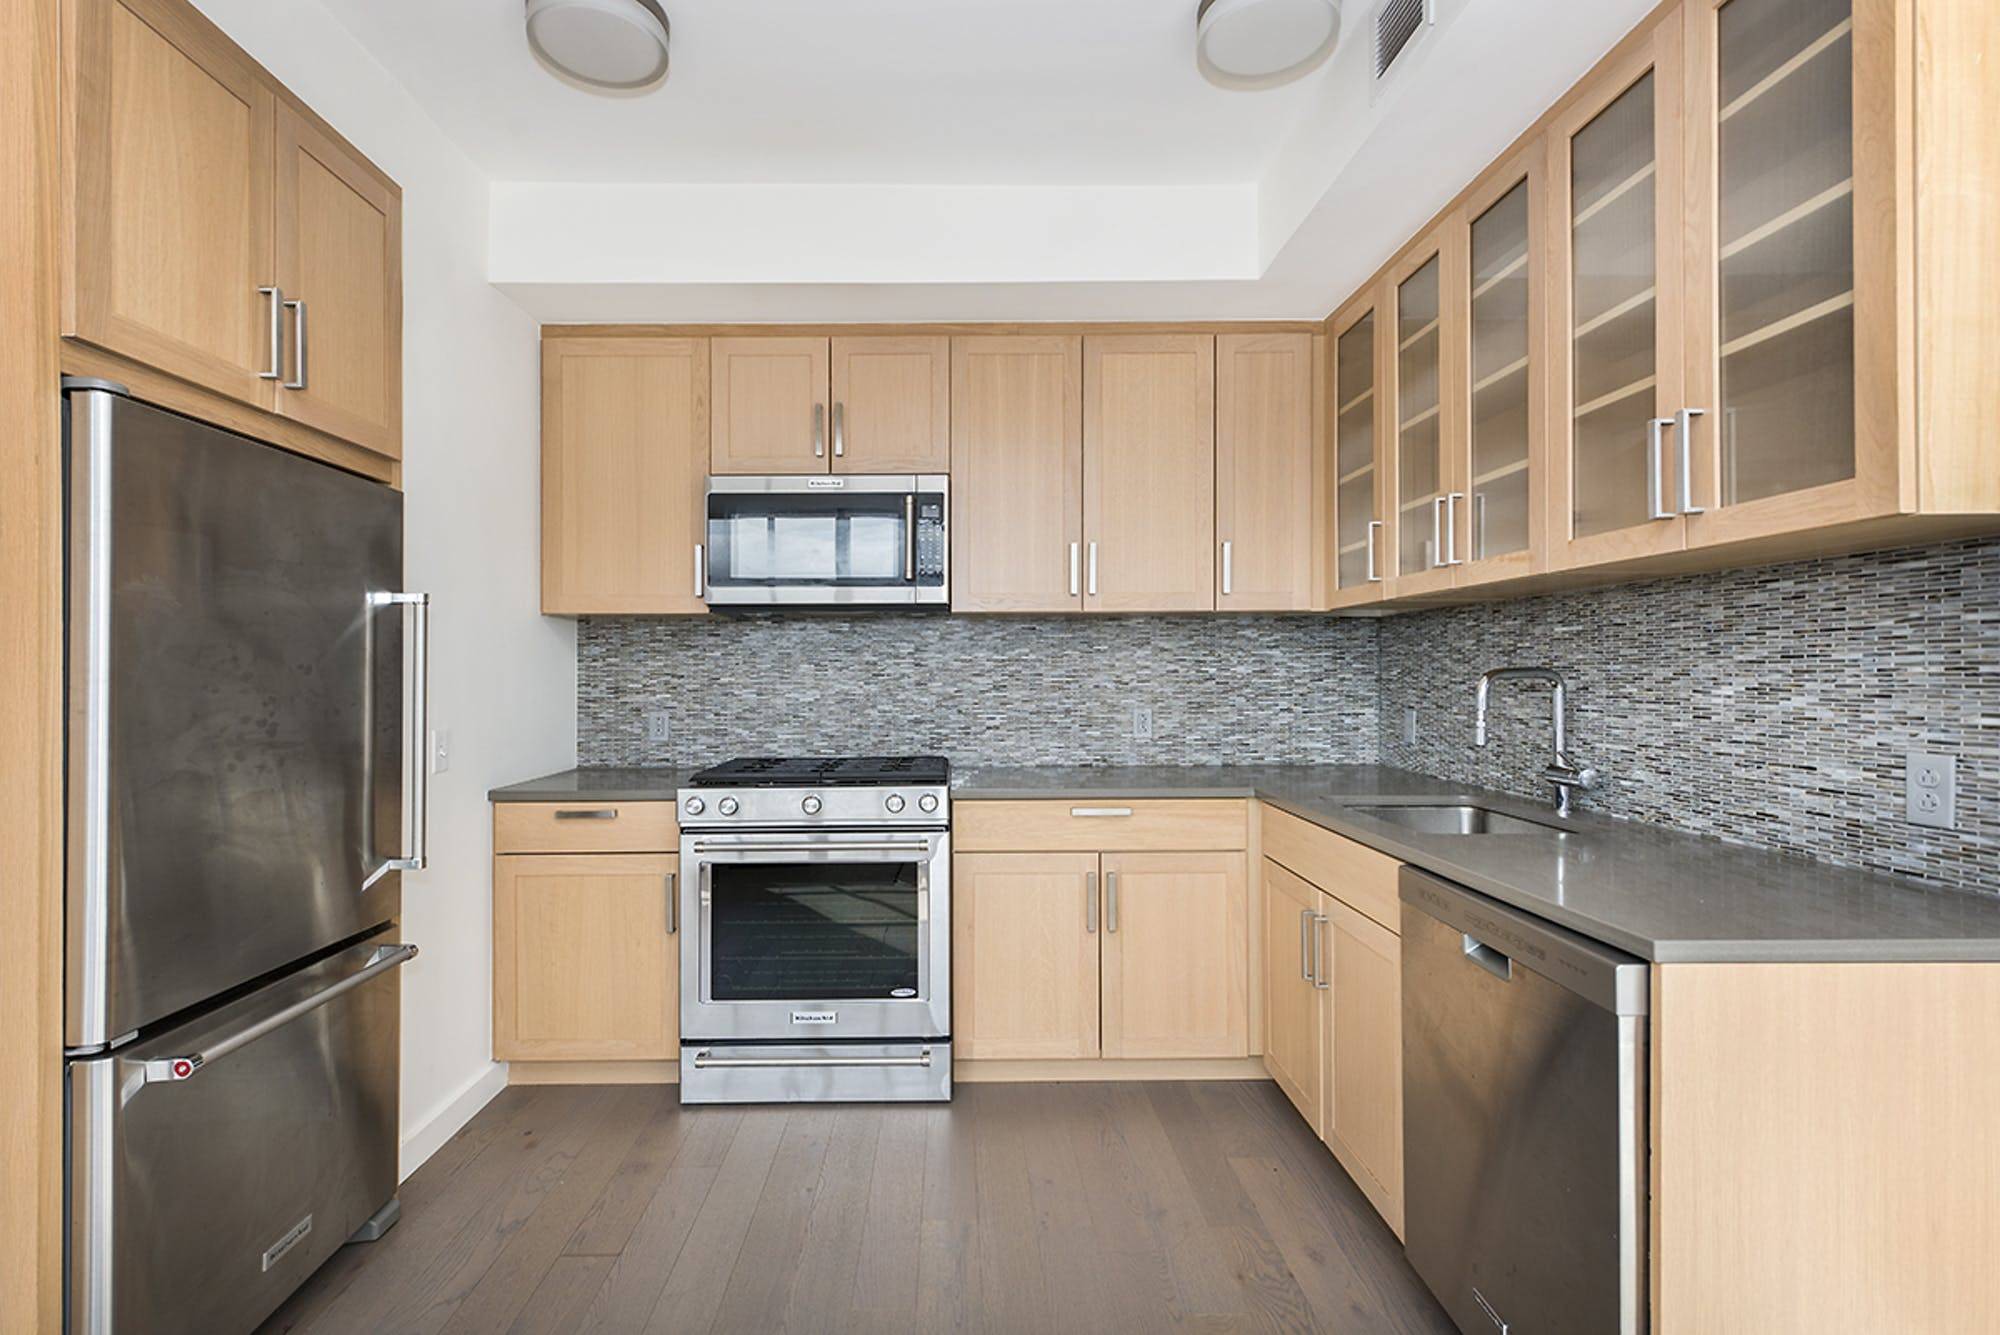 Rent Stabilized Heat, AC, amp ; Cooking Gas Included 1 Month Free 2681 net, 2925 gross Welcome to The Williams Formally the site of the Spilkes Bakery, this newly constructed ...